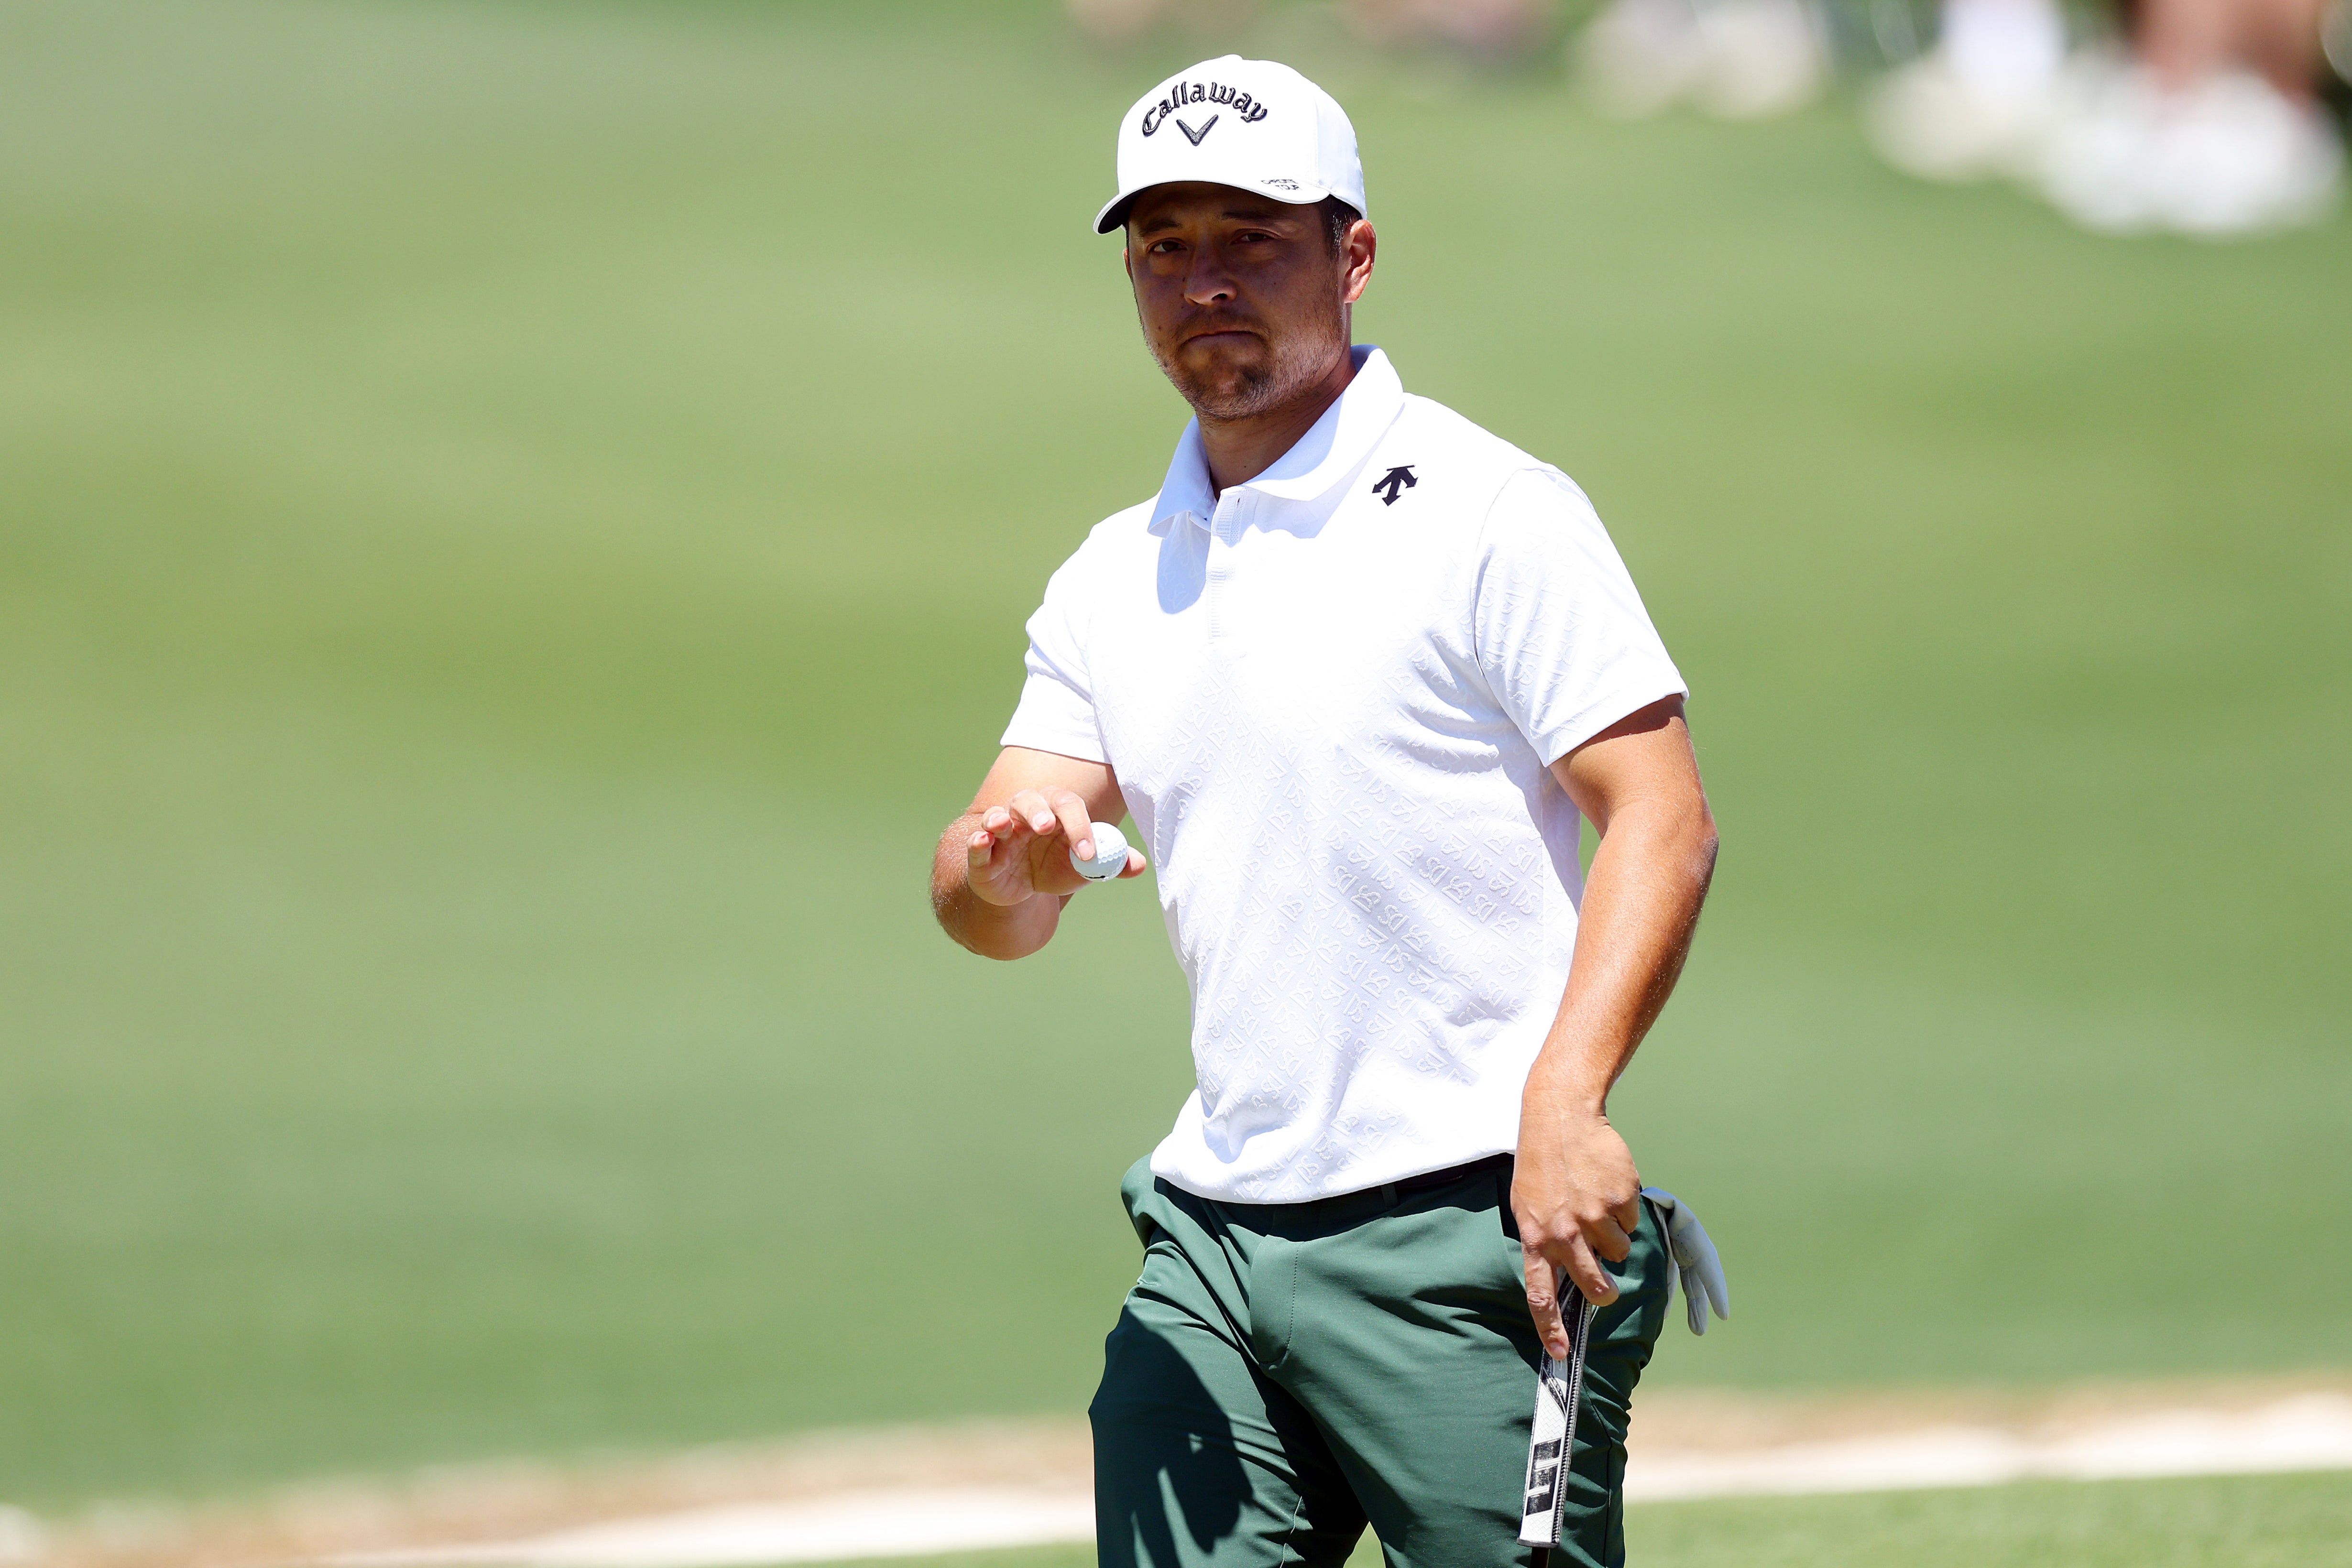 Schauffele has been racking up the top-10 finishes in recent months